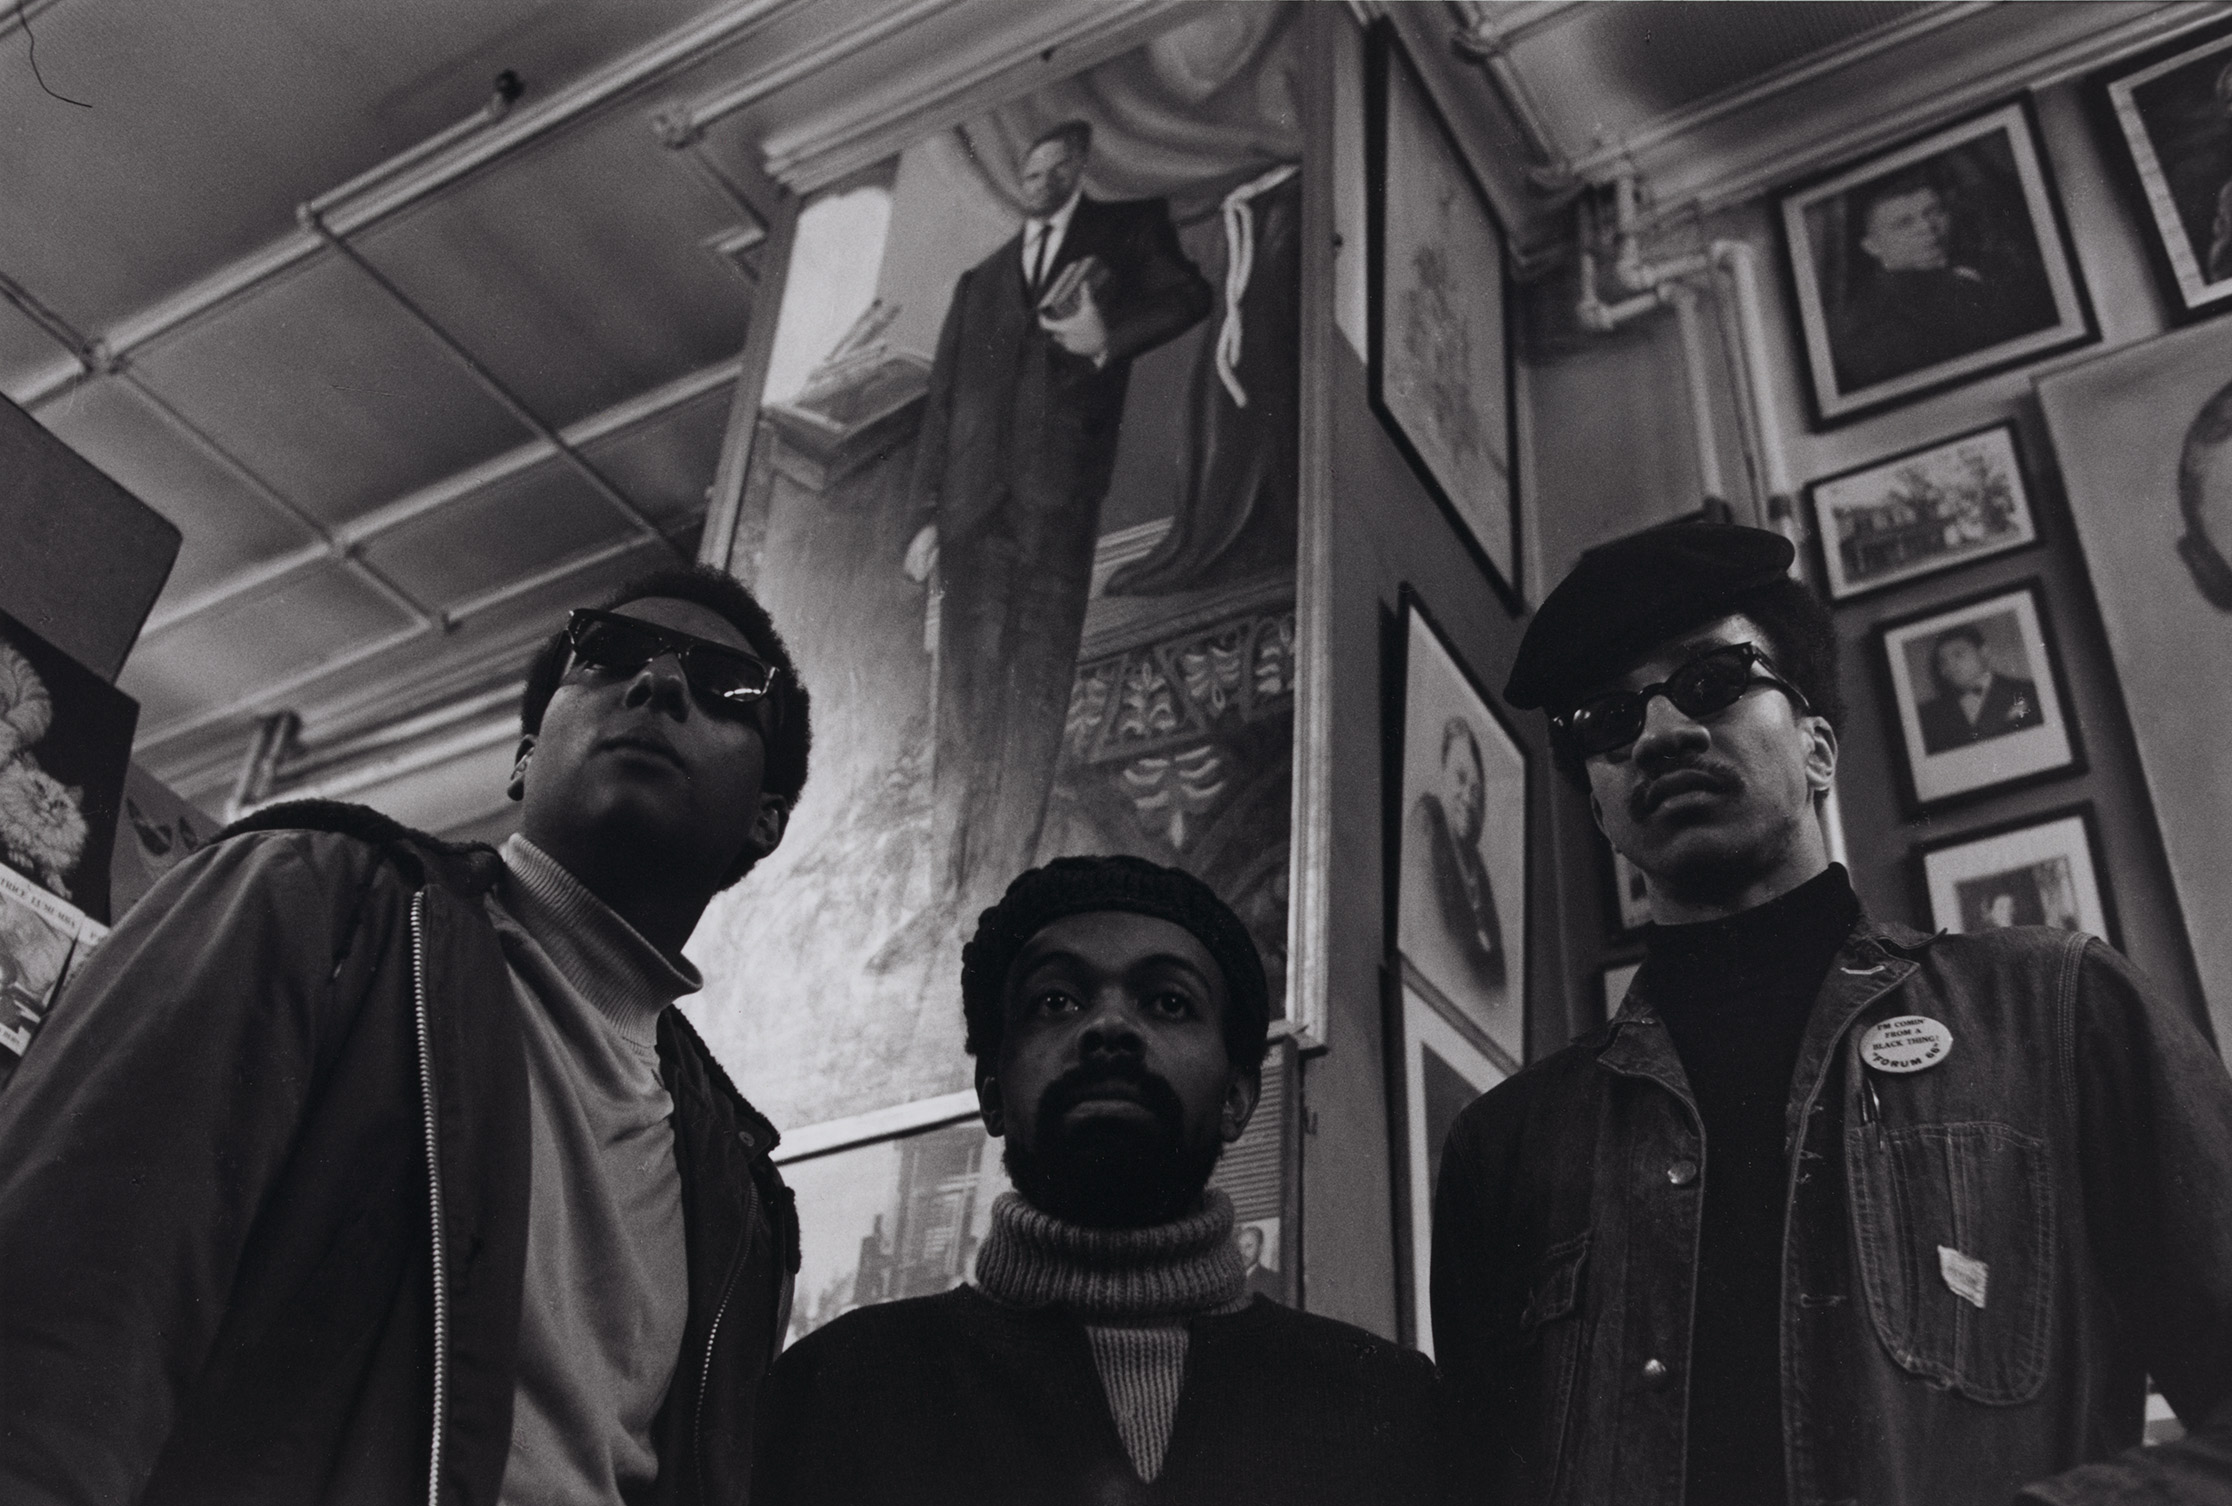 Stokely Carmichael, LeRoi Jones and Al-Amin, far right, at Michaux’s, a bookstore in Harlem, in 1976 (James E. Hinton—Library of Congress)